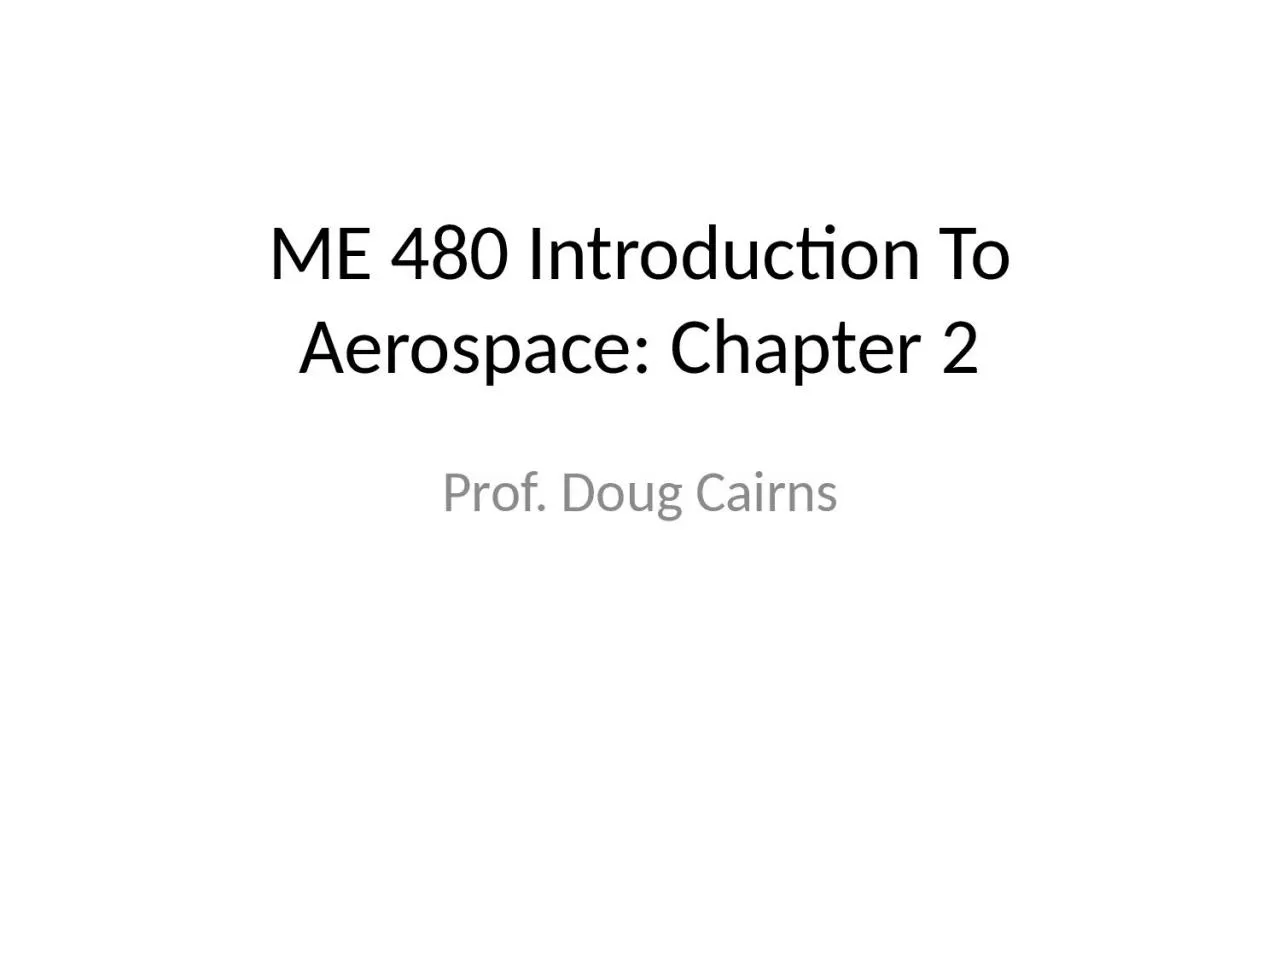 ME 480 Introduction To Aerospace: Chapter 2